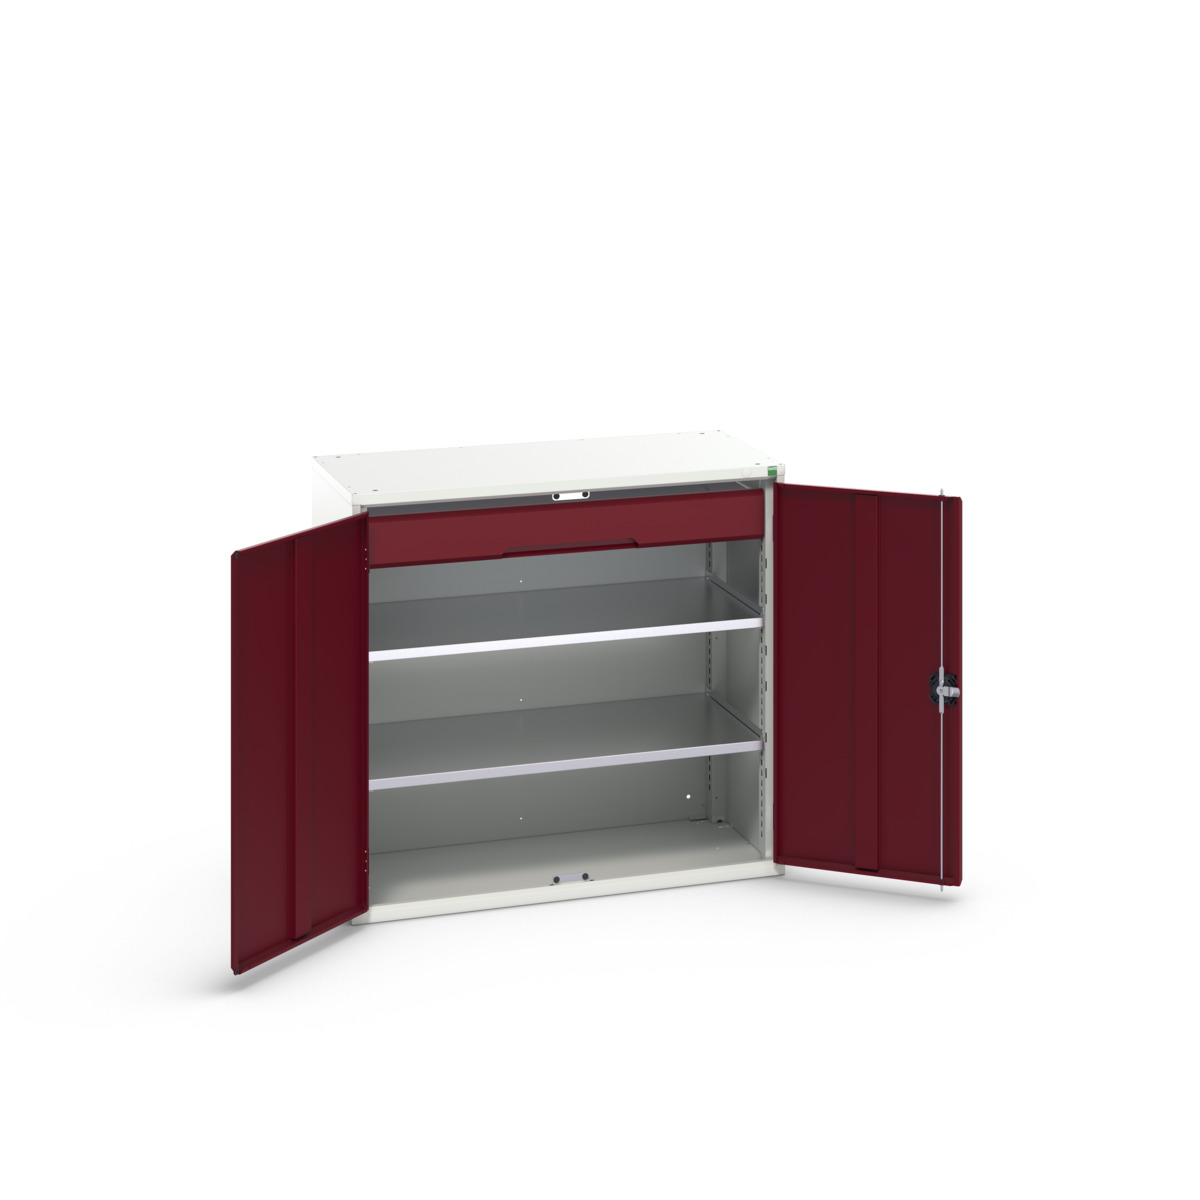 16926552.24 - verso kitted cupboard